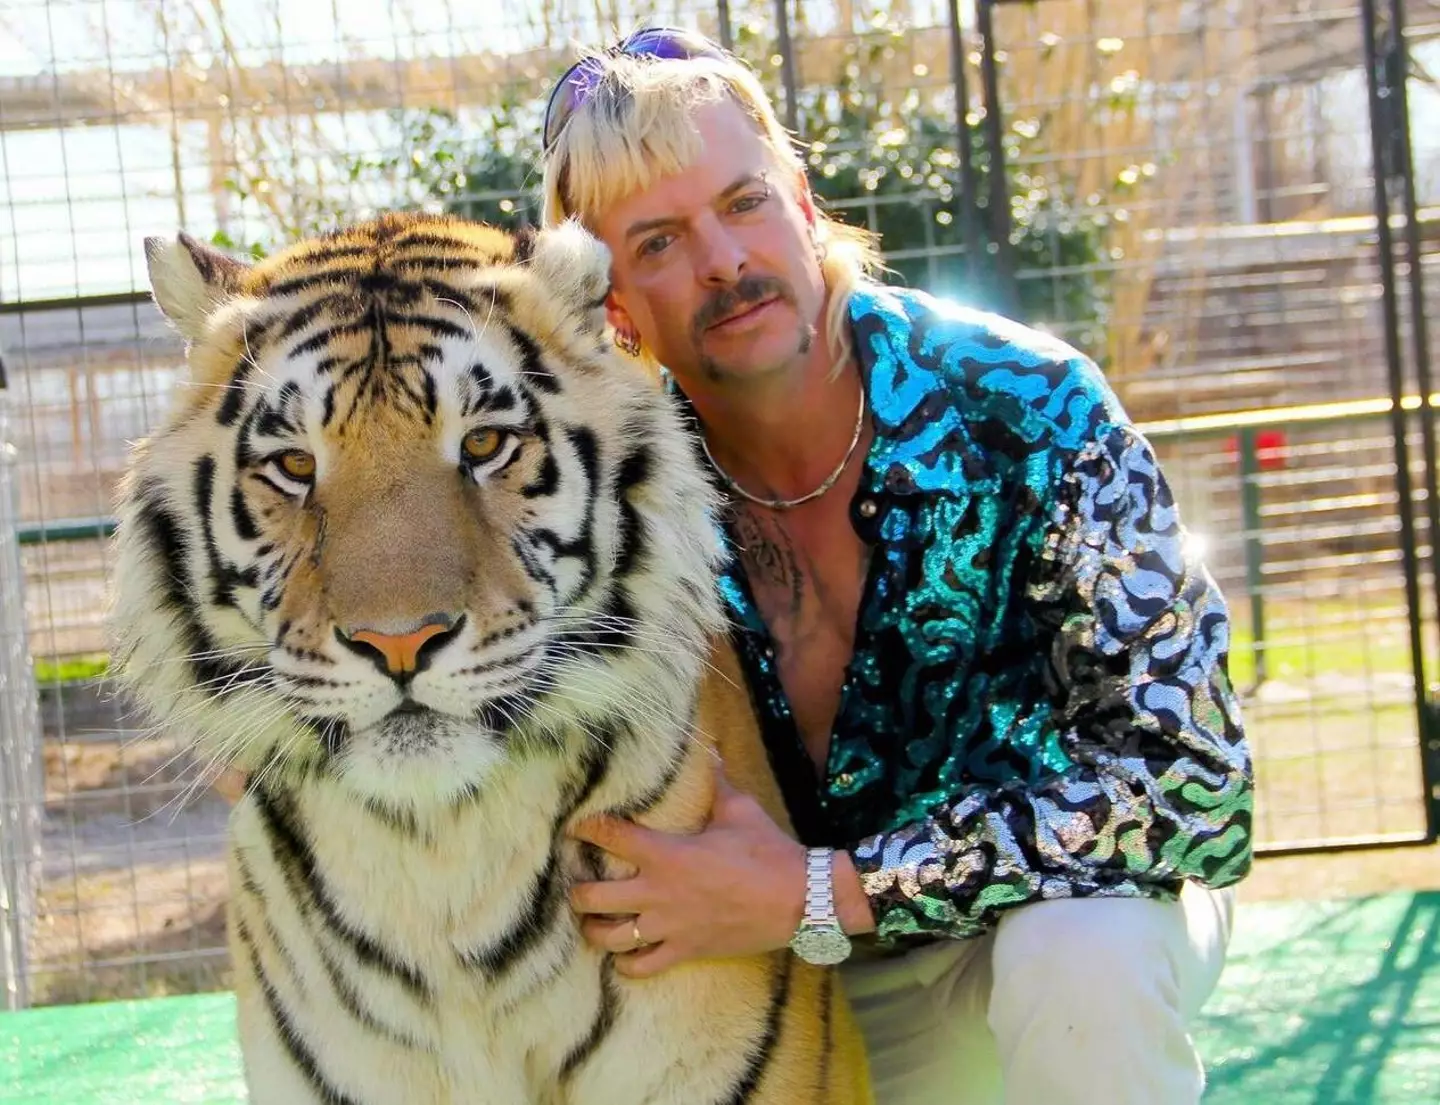 Joe Exotic has revealed his views on the news.